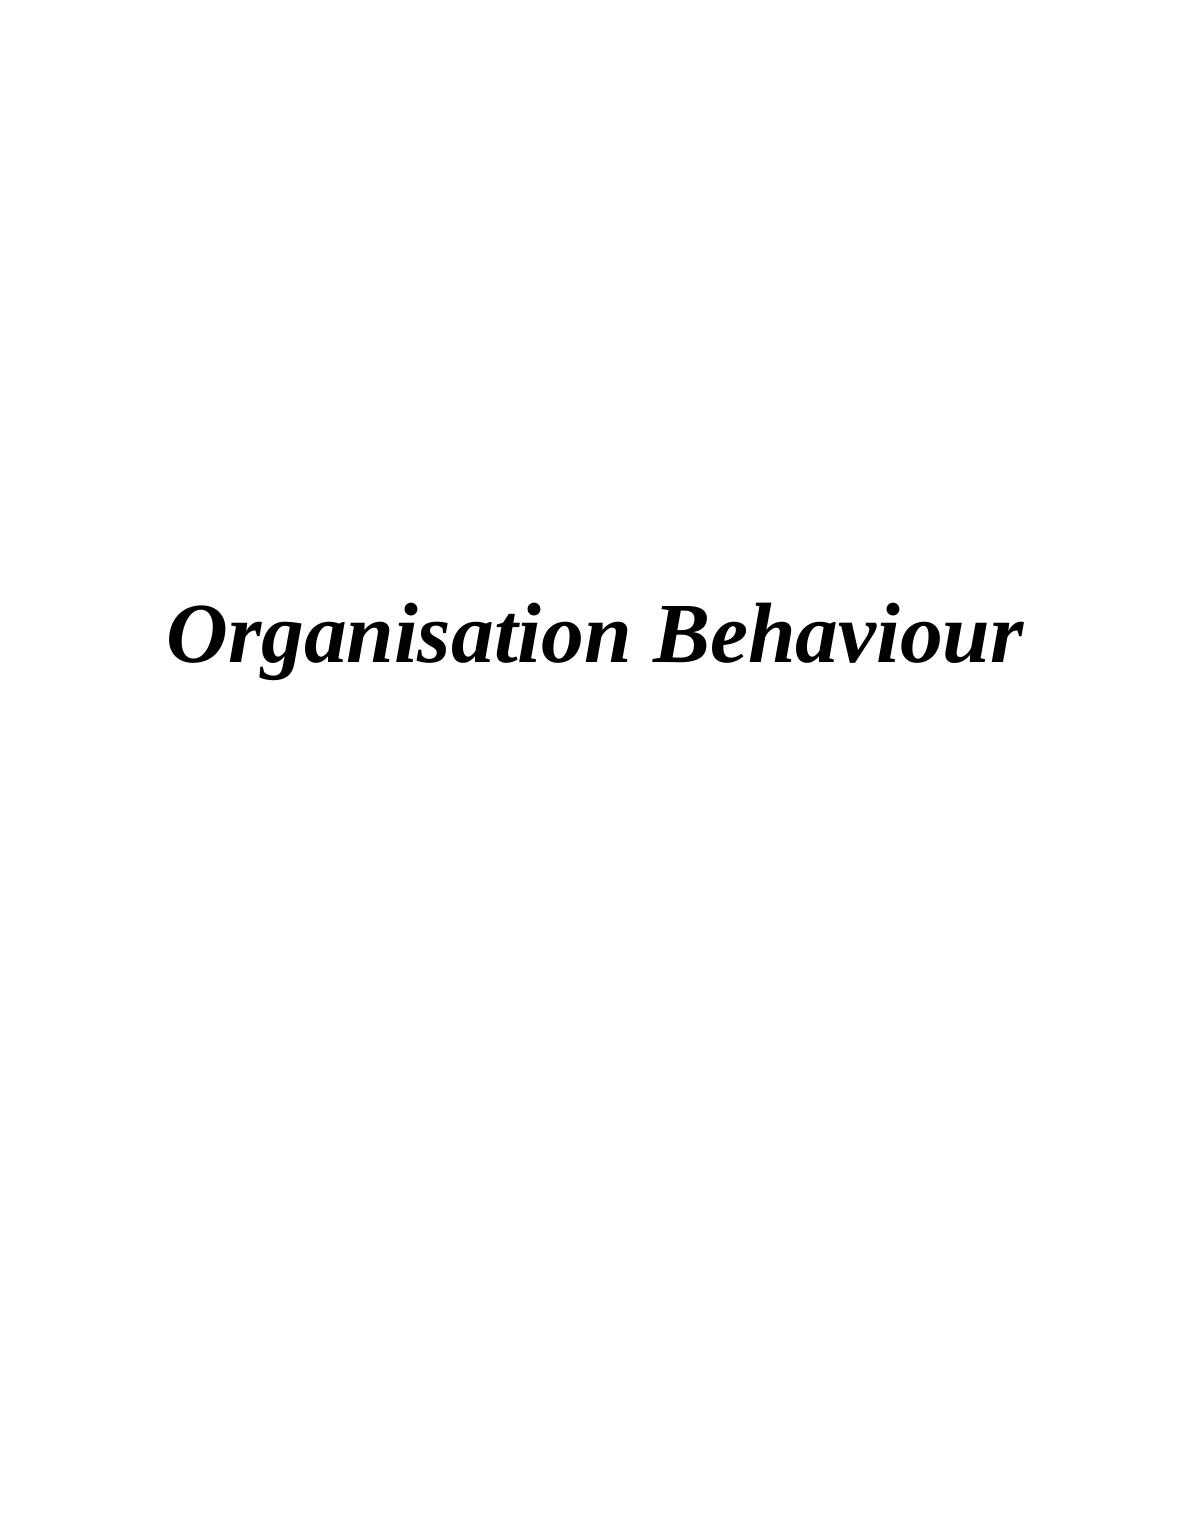 Culture, Power and Politics Influence Individual and Team Behaviour - Report_1